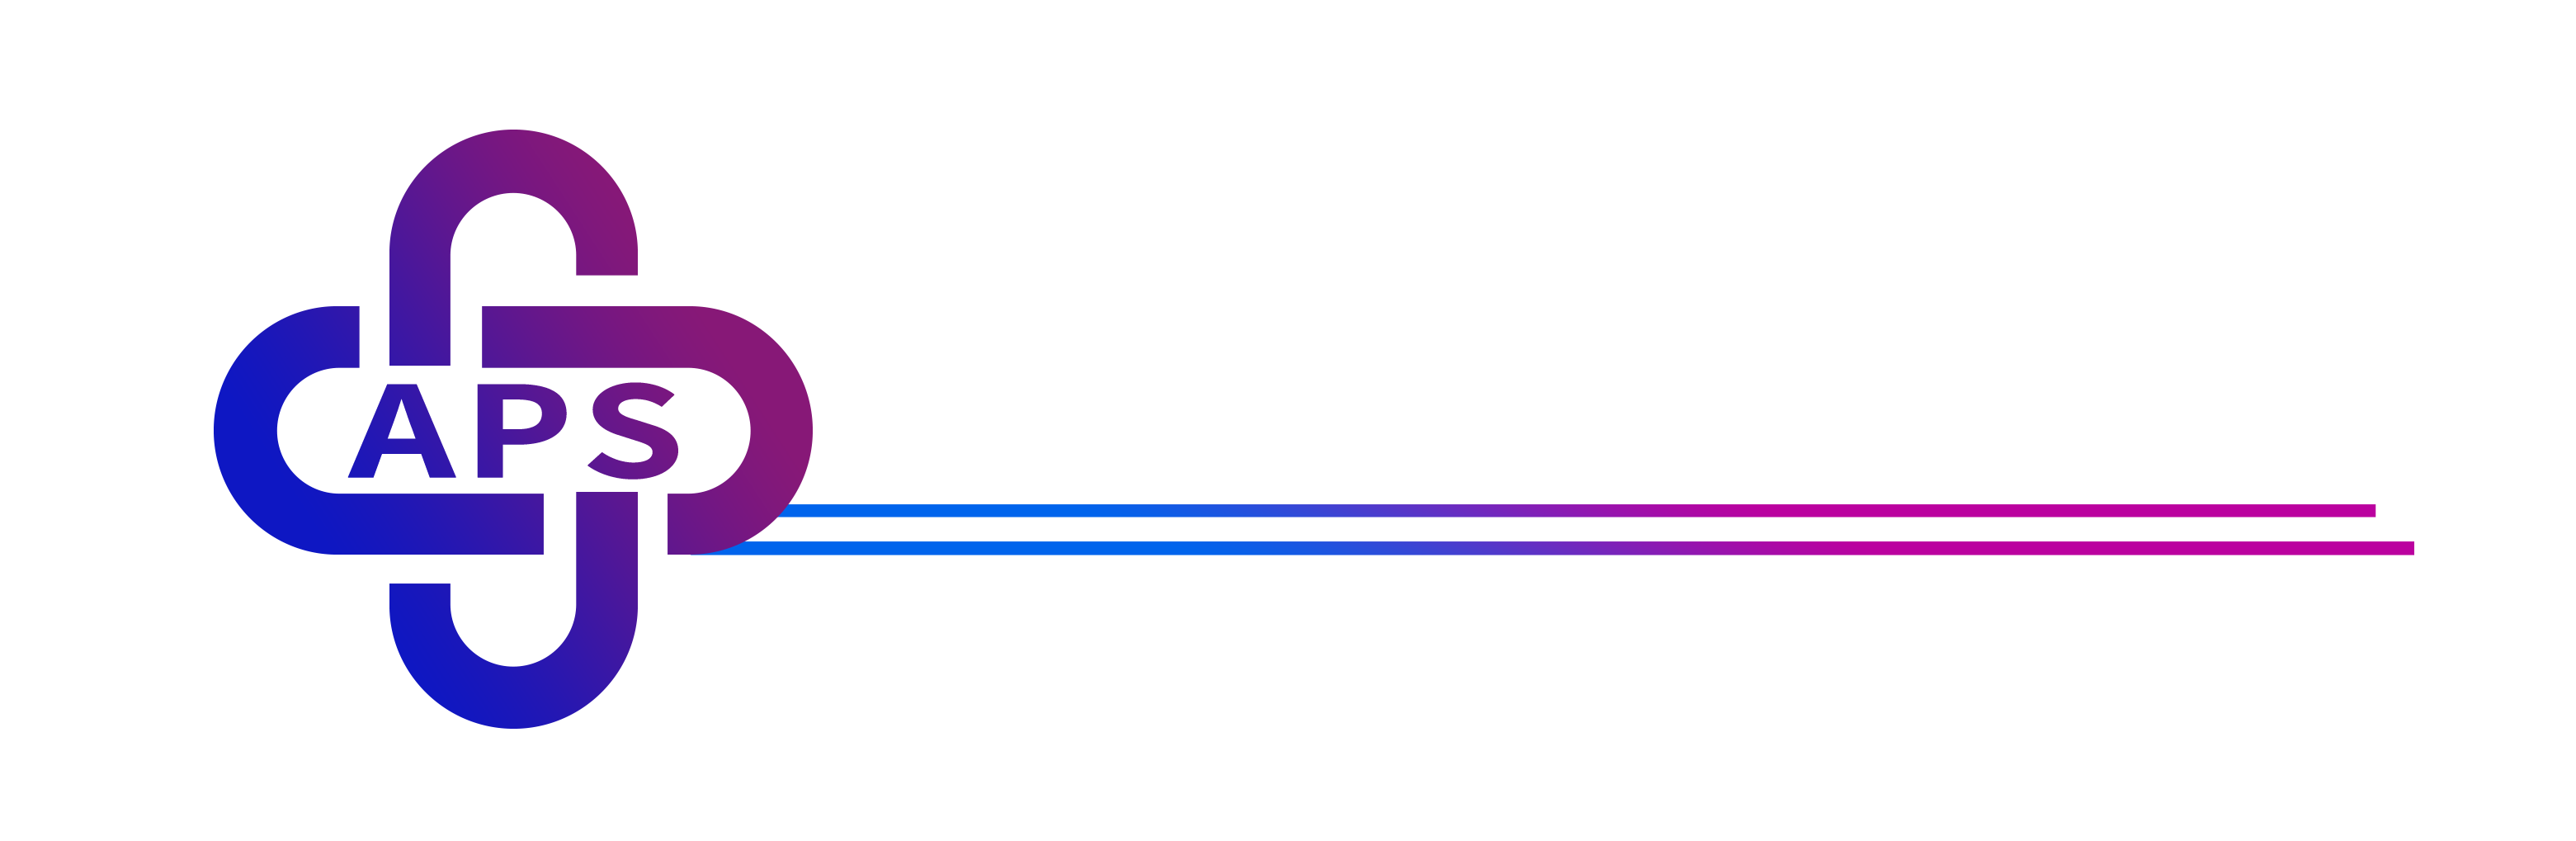 Applied Pharmaceutical Science, Inc.